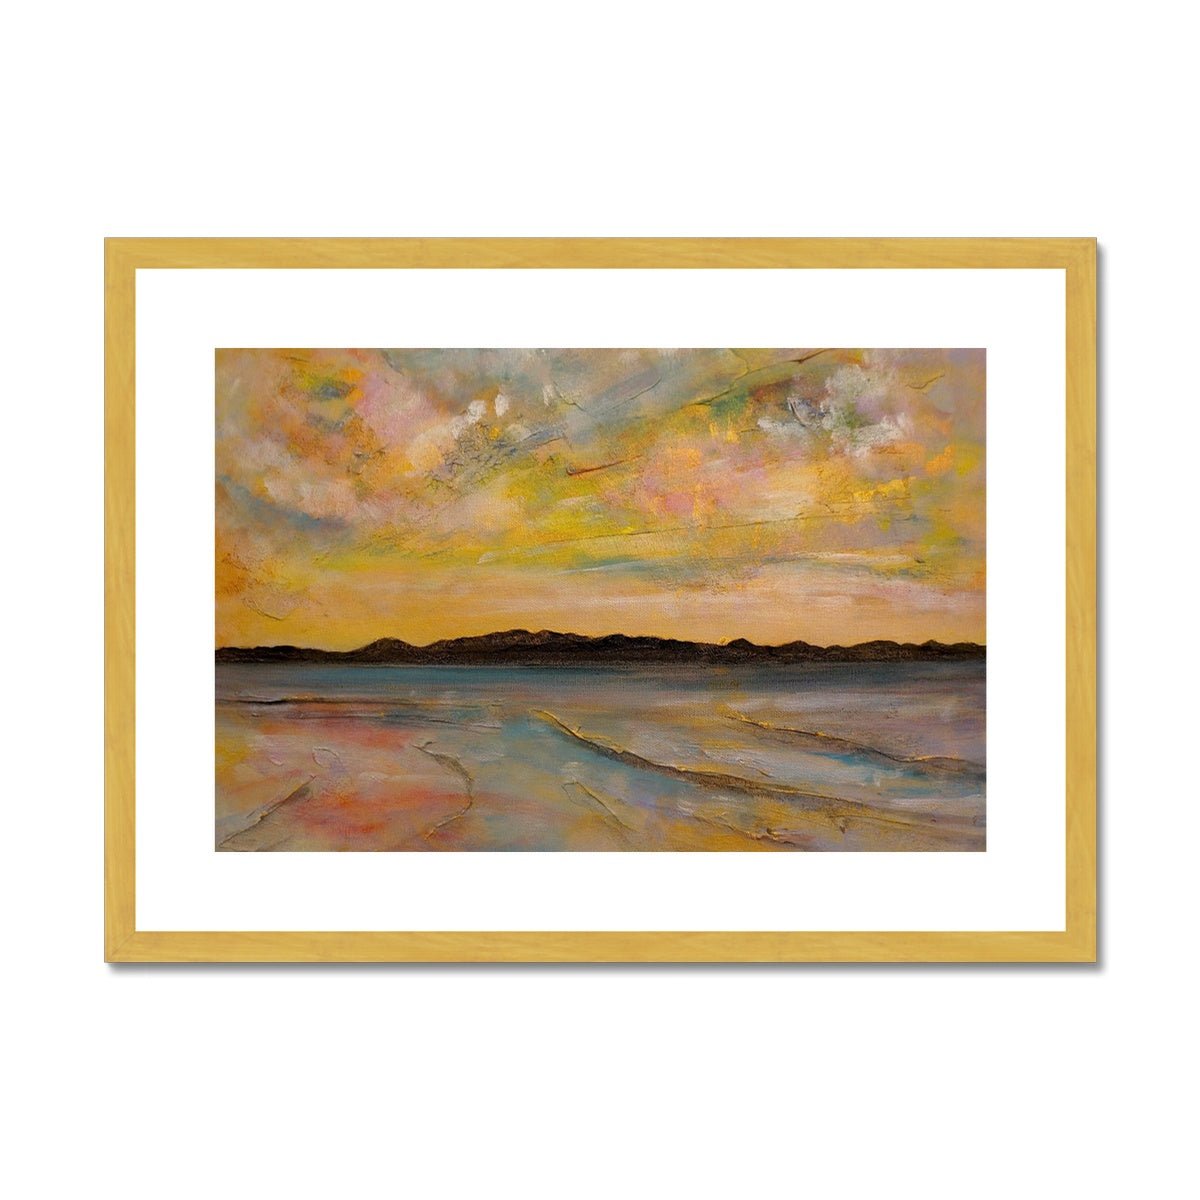 Vallay Island North Uist Painting | Antique Framed & Mounted Prints From Scotland-Antique Framed & Mounted Prints-Hebridean Islands Art Gallery-A2 Landscape-Gold Frame-Paintings, Prints, Homeware, Art Gifts From Scotland By Scottish Artist Kevin Hunter